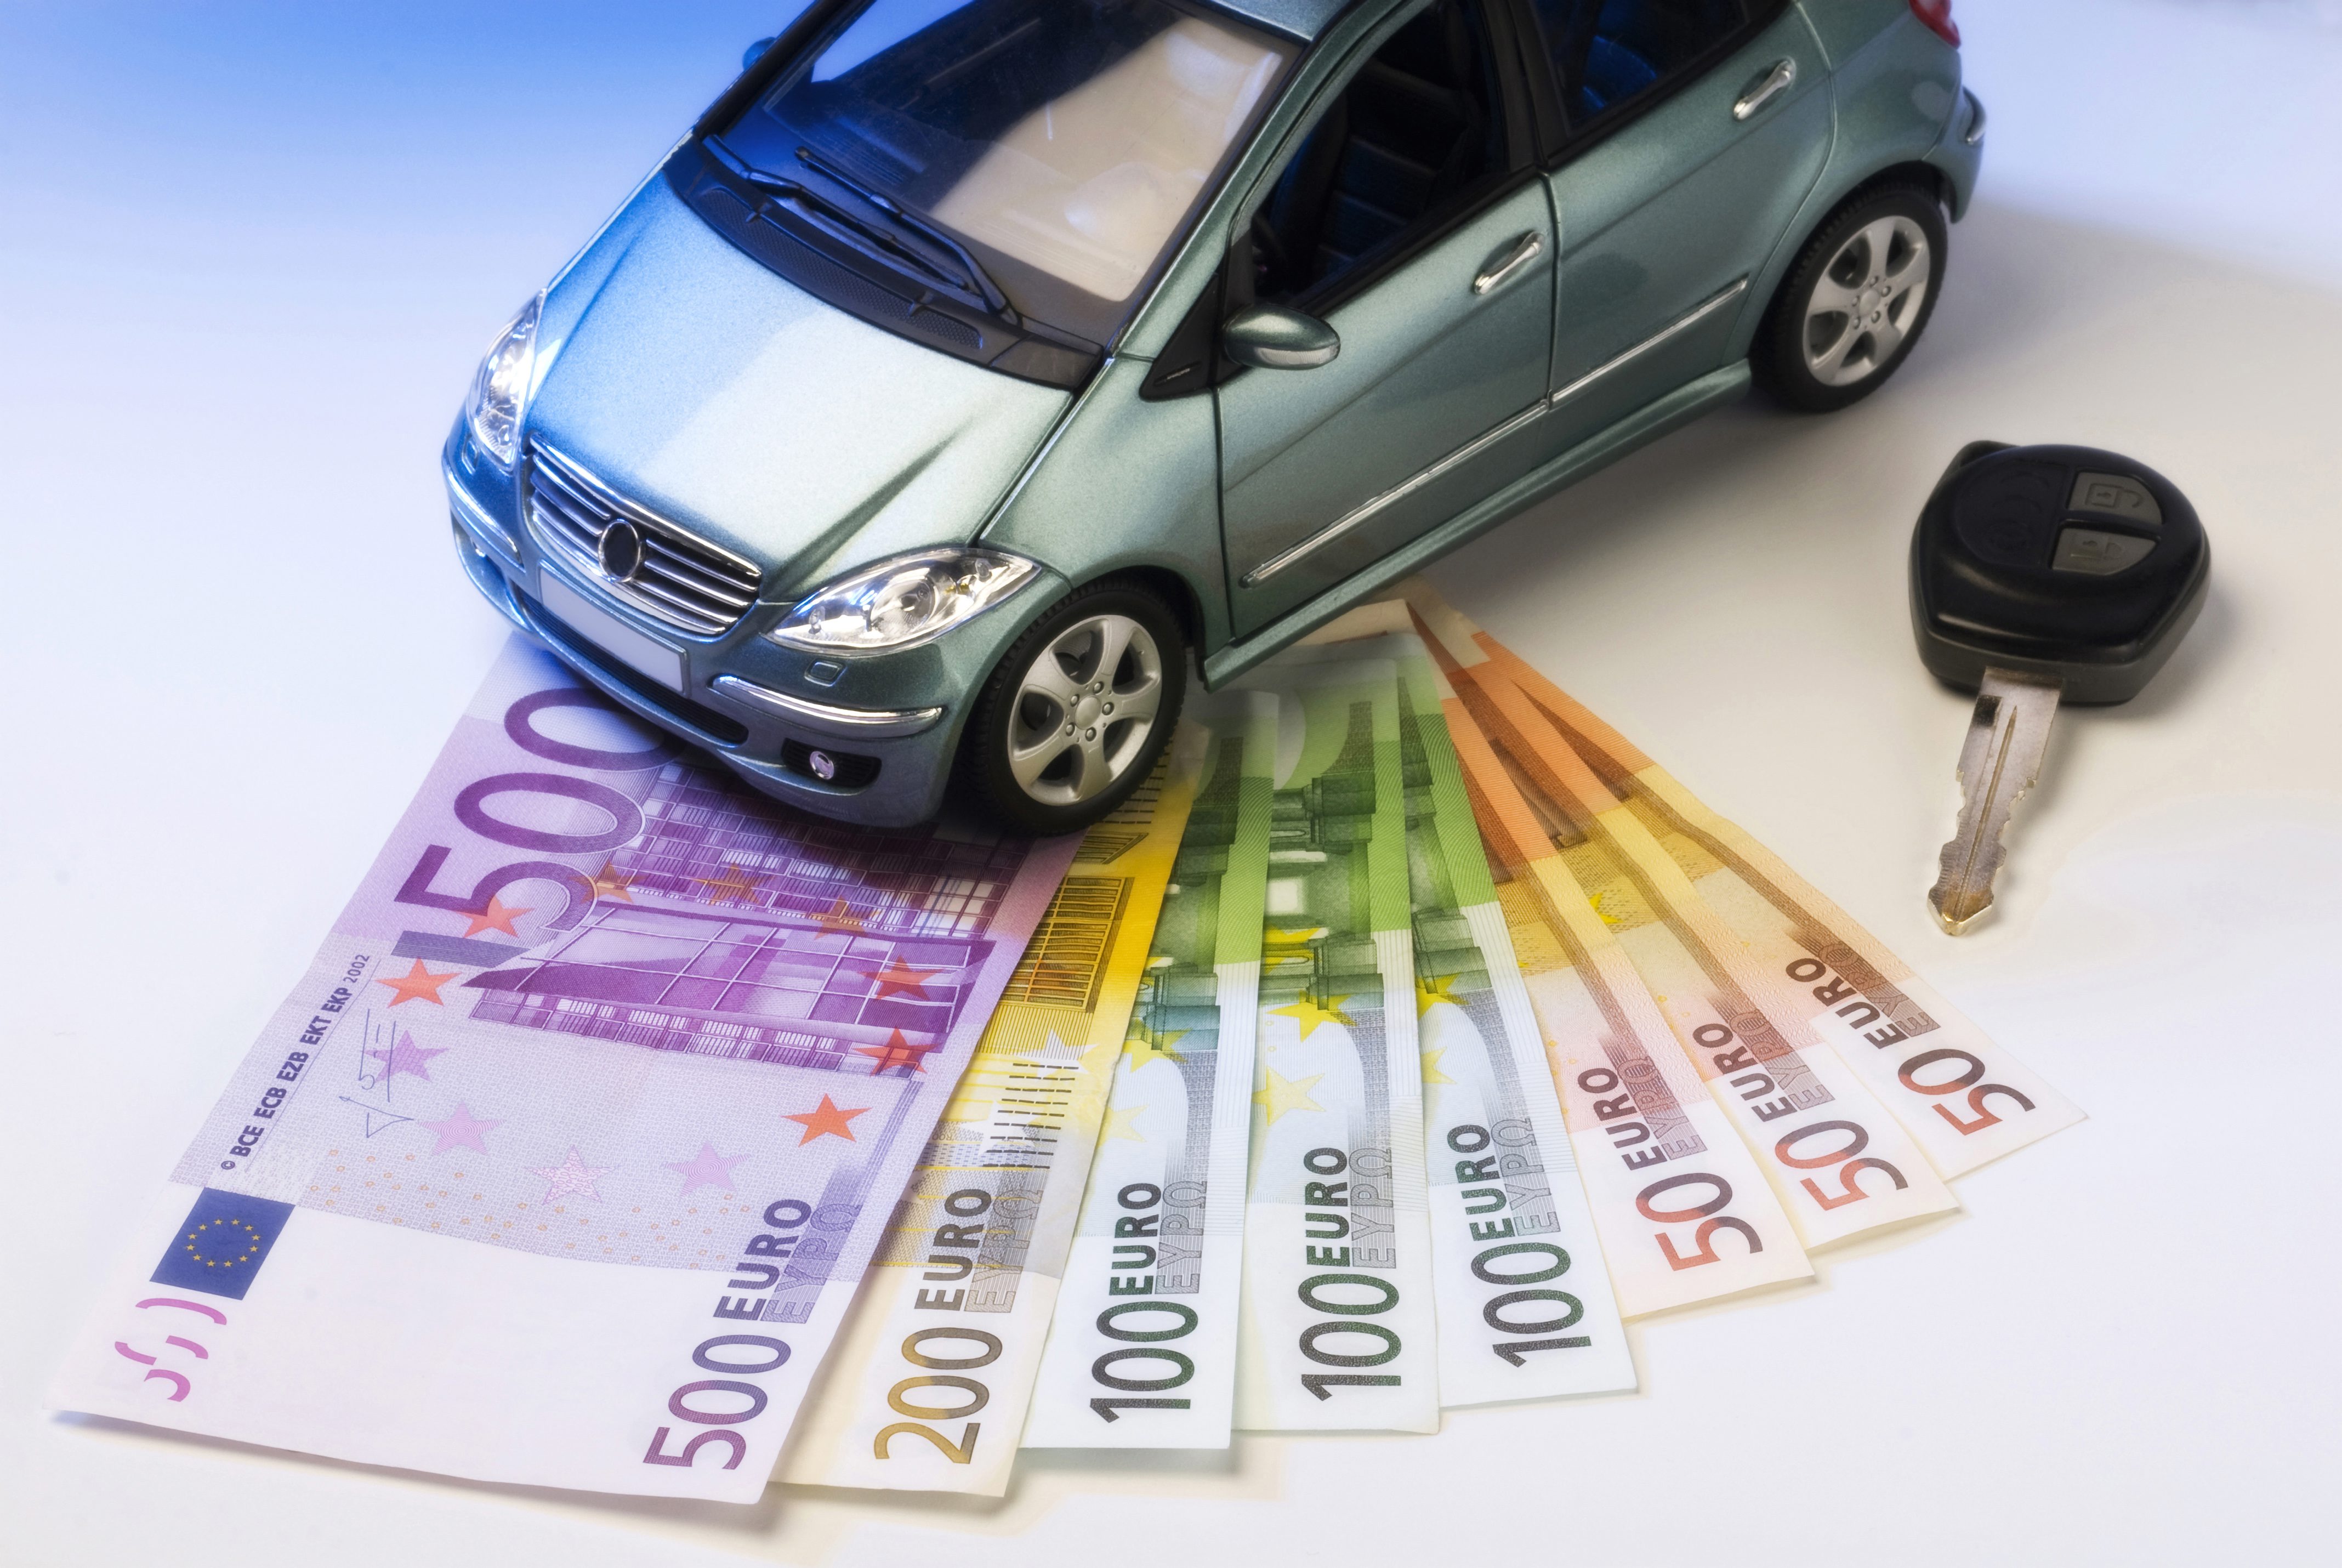 Car insurance most expensive in Antwerp